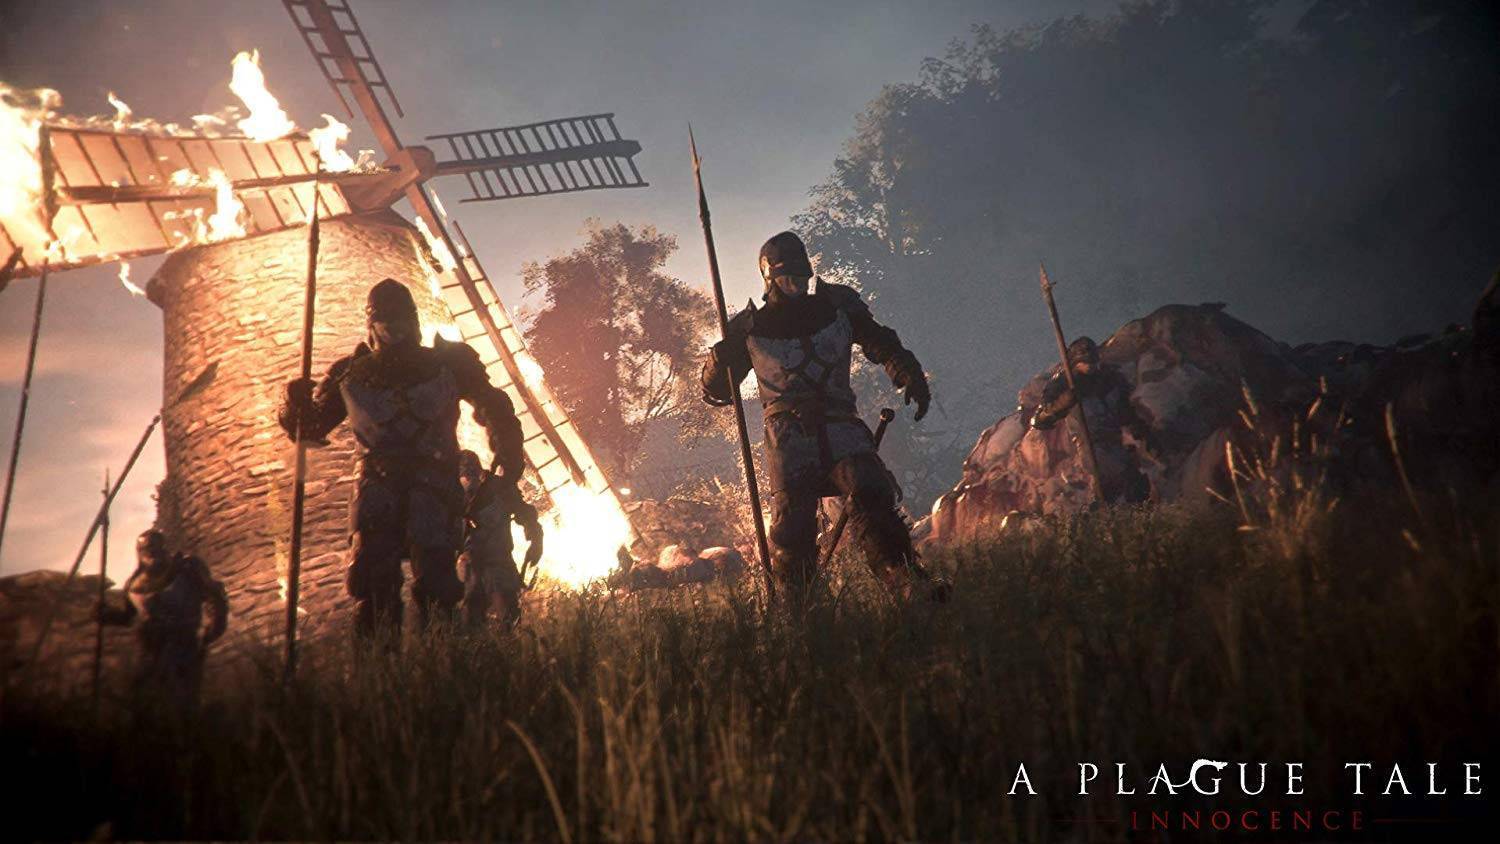 A Plague Tale: Innocence (PS4) cheap - Price of $15.93